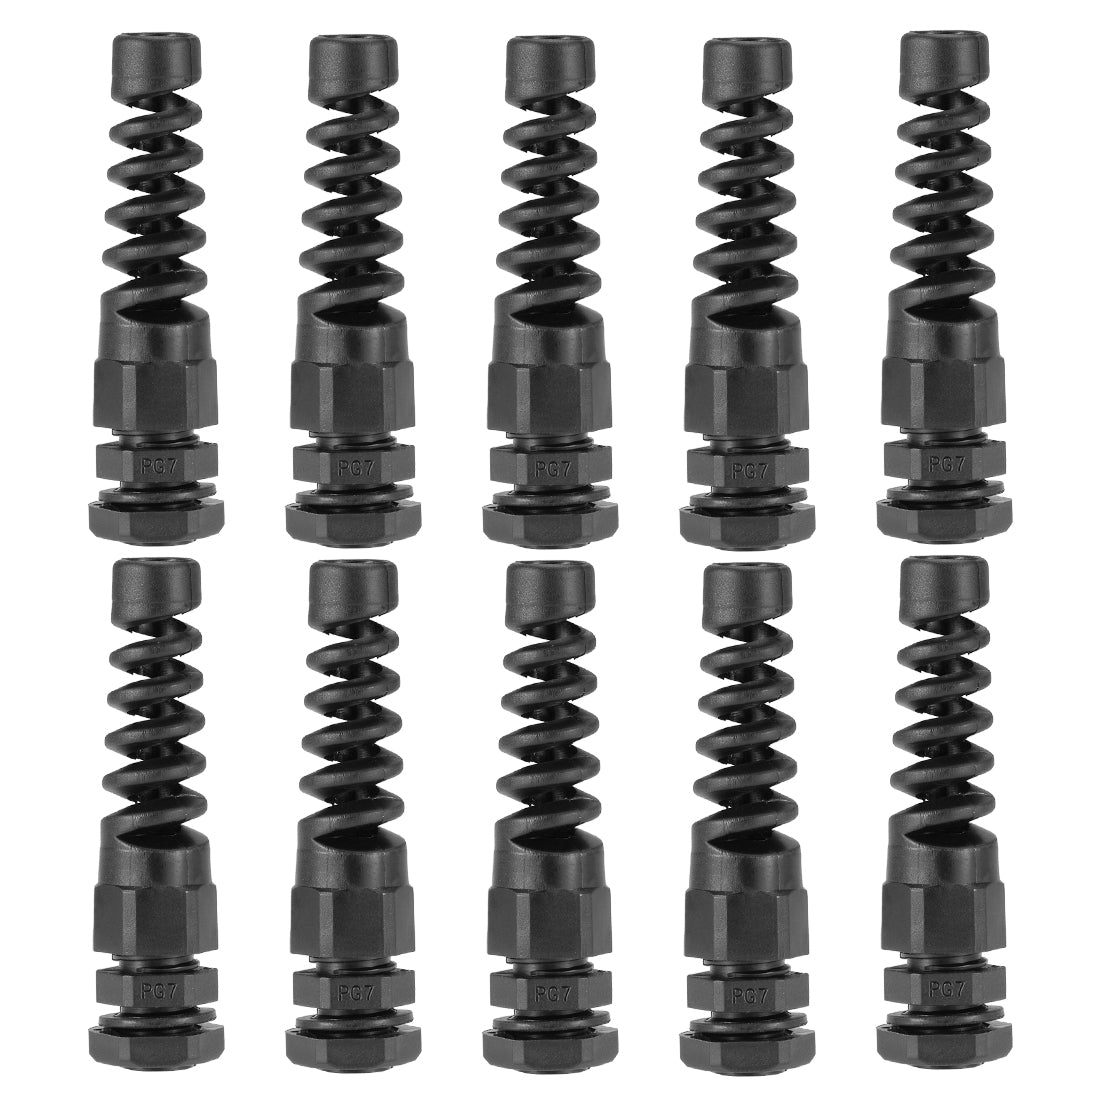 uxcell Uxcell PG7 Cable Gland 3mm-6.5mm Wire Hole Waterproof Nylon Joint Adjustable Locknut with Strain Relief Black 10pcs